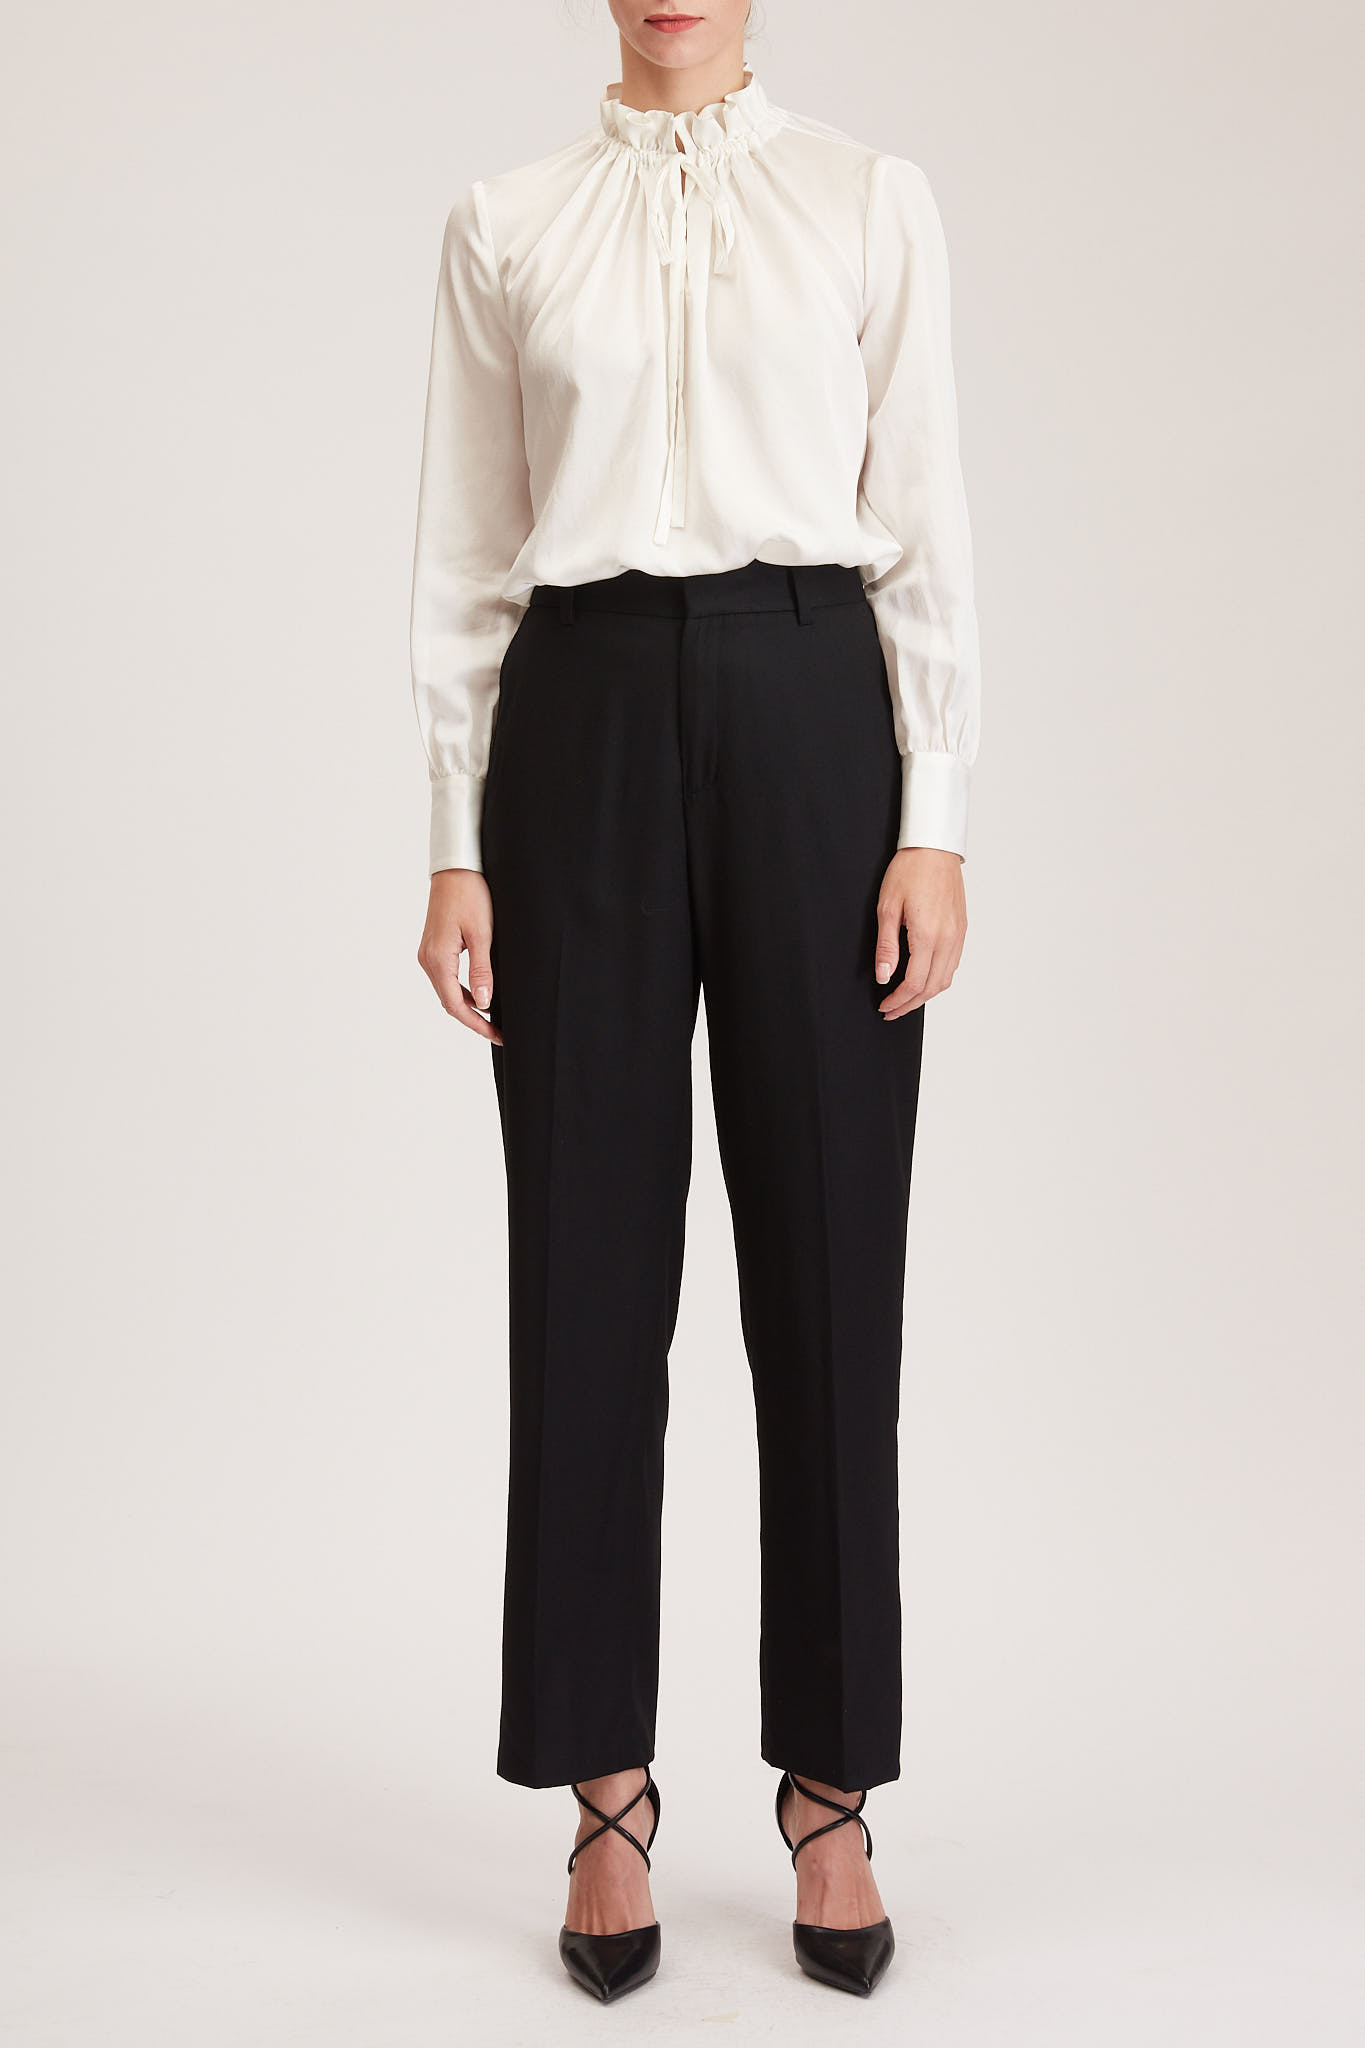 Manchester Trouser – High-waisted cropped trousers in plain black wool